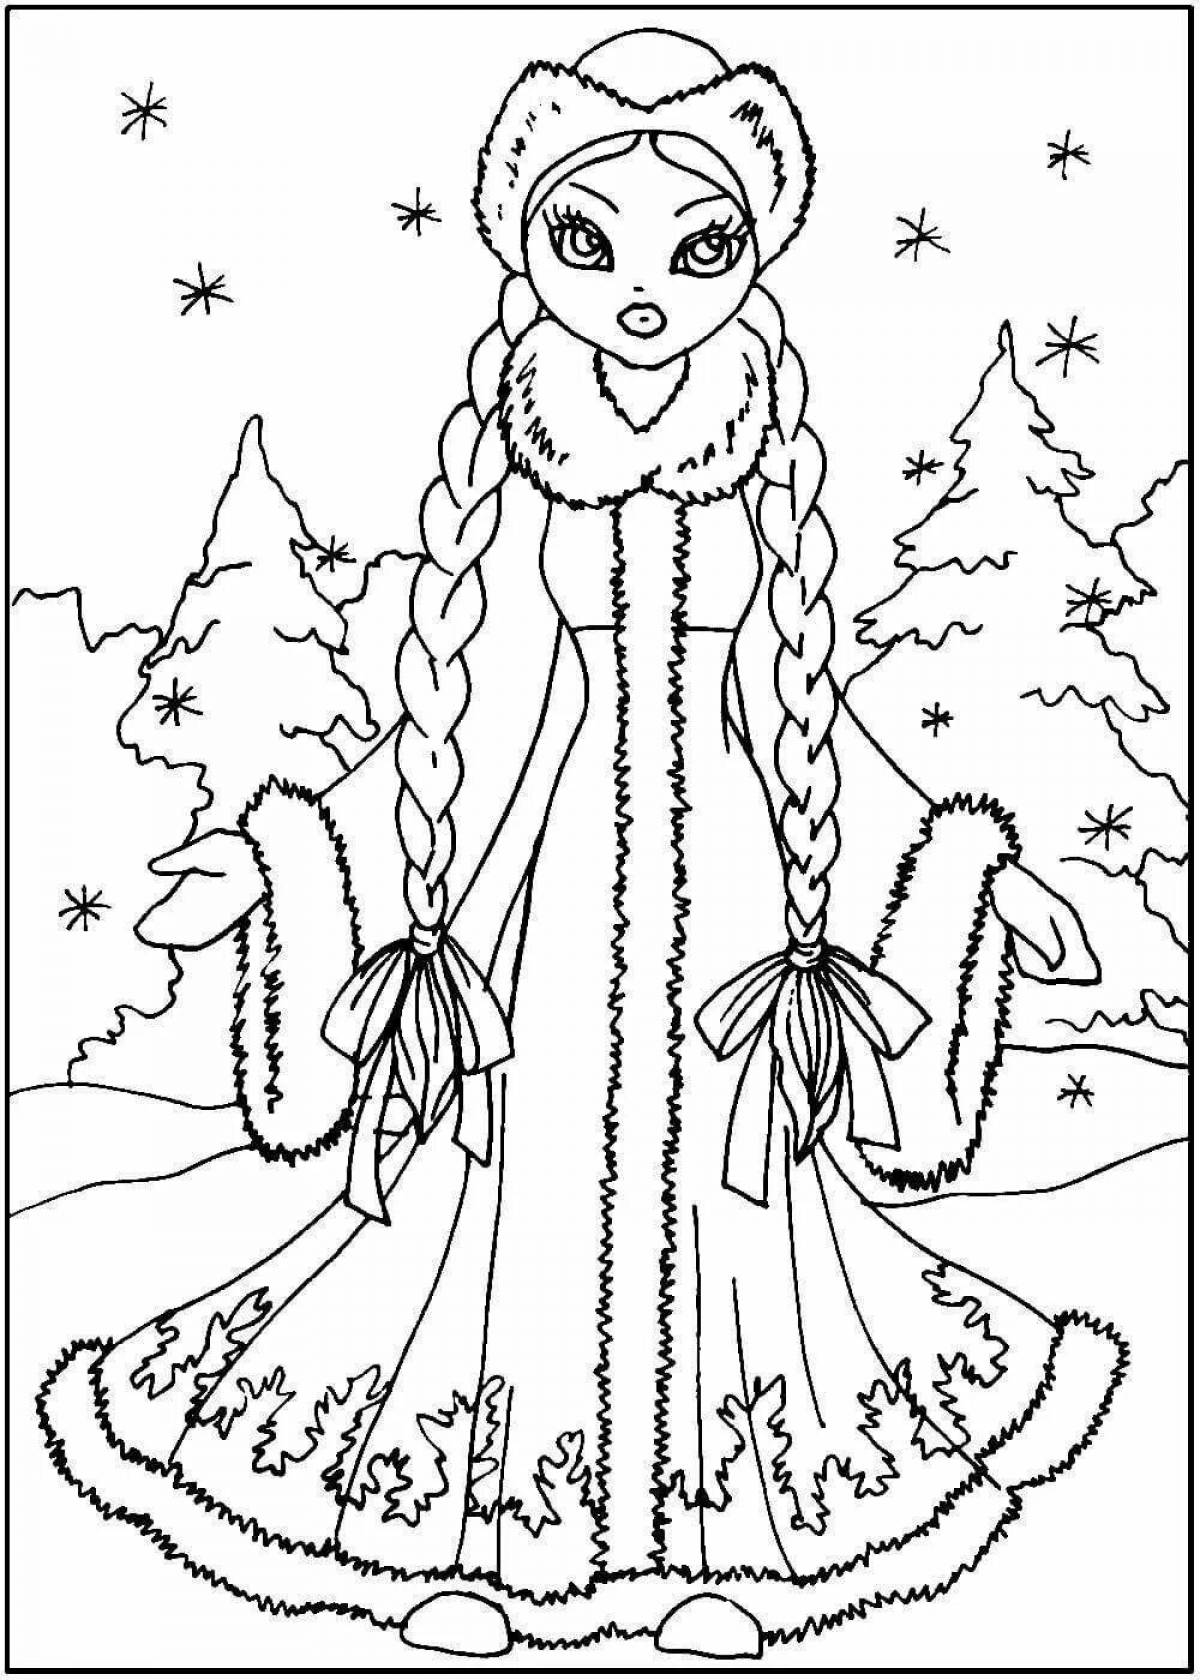 By numbers snow maiden #2